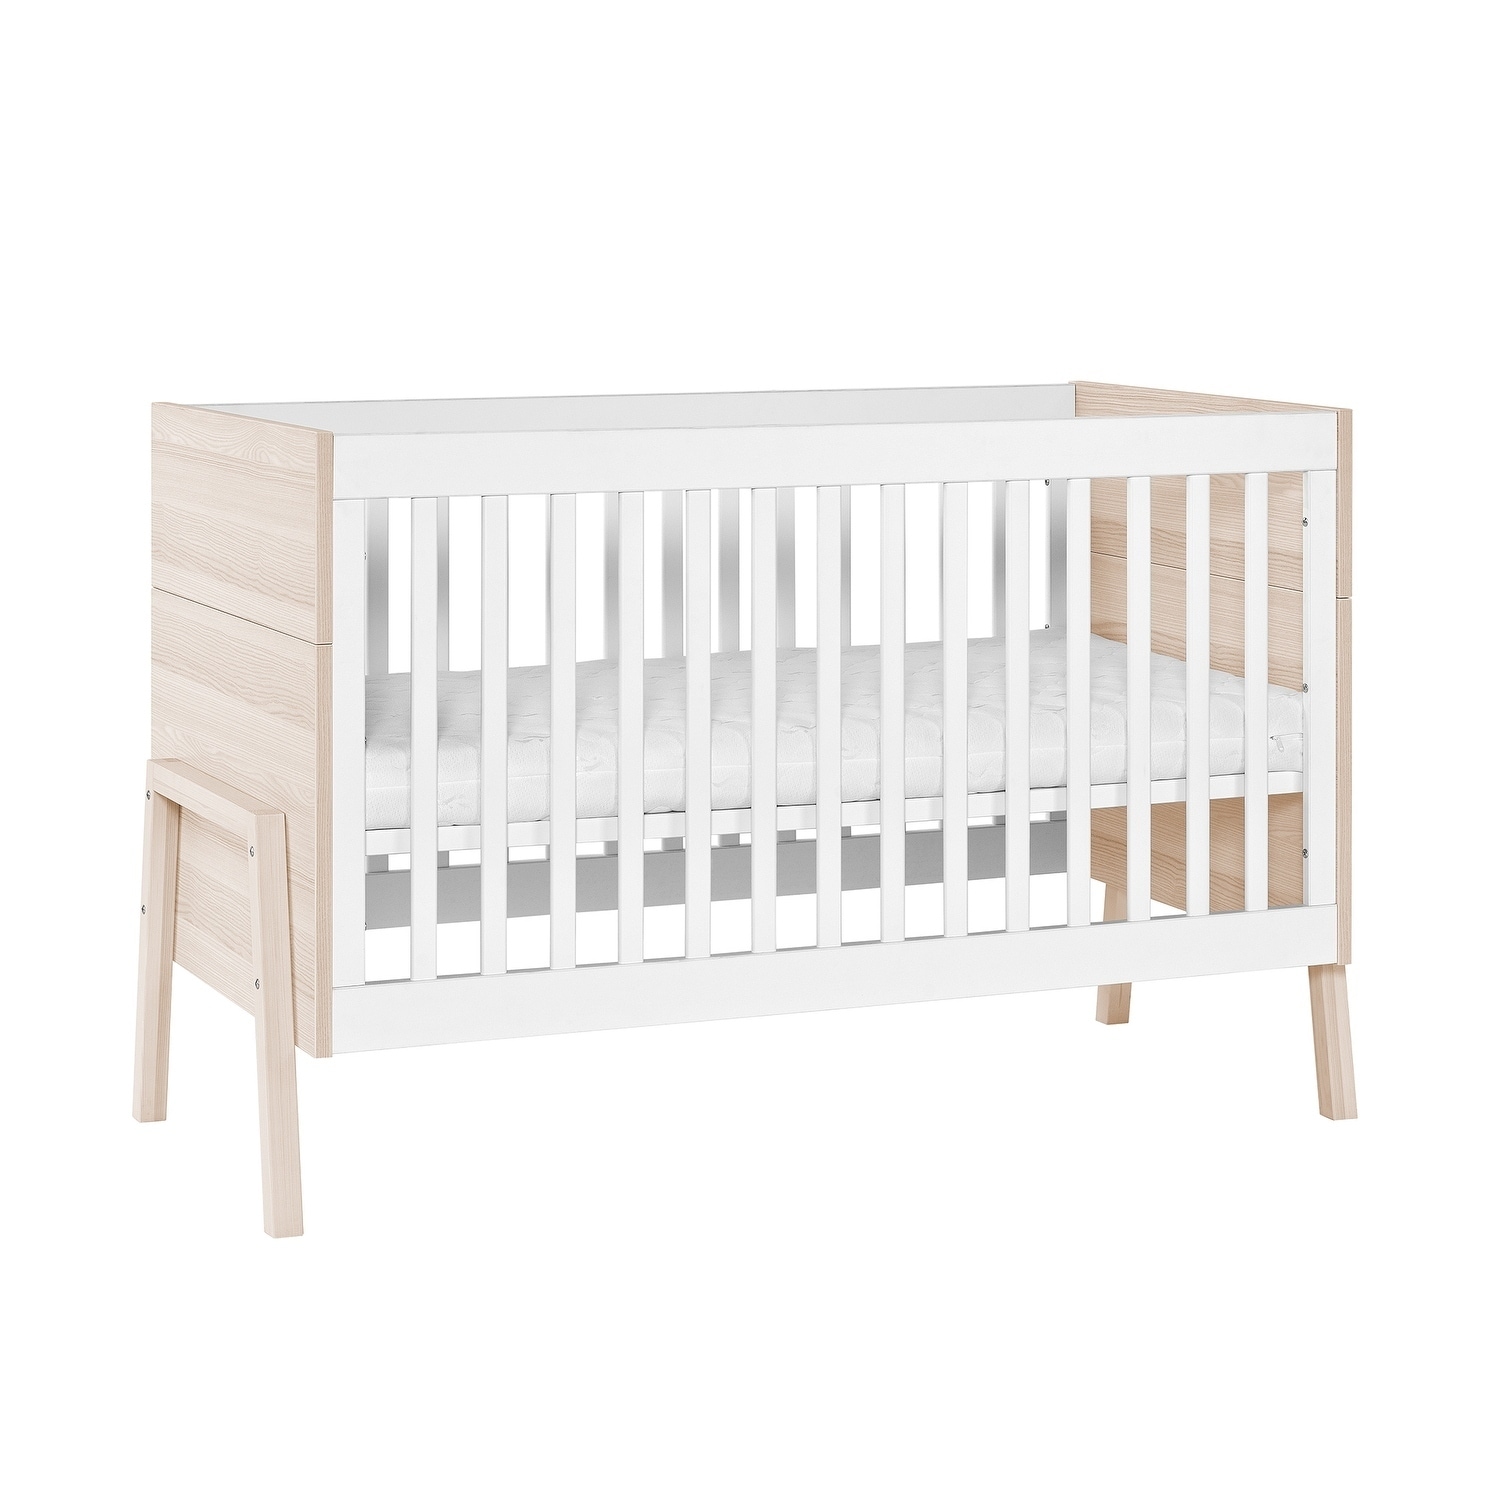 3 in 1 crib bed